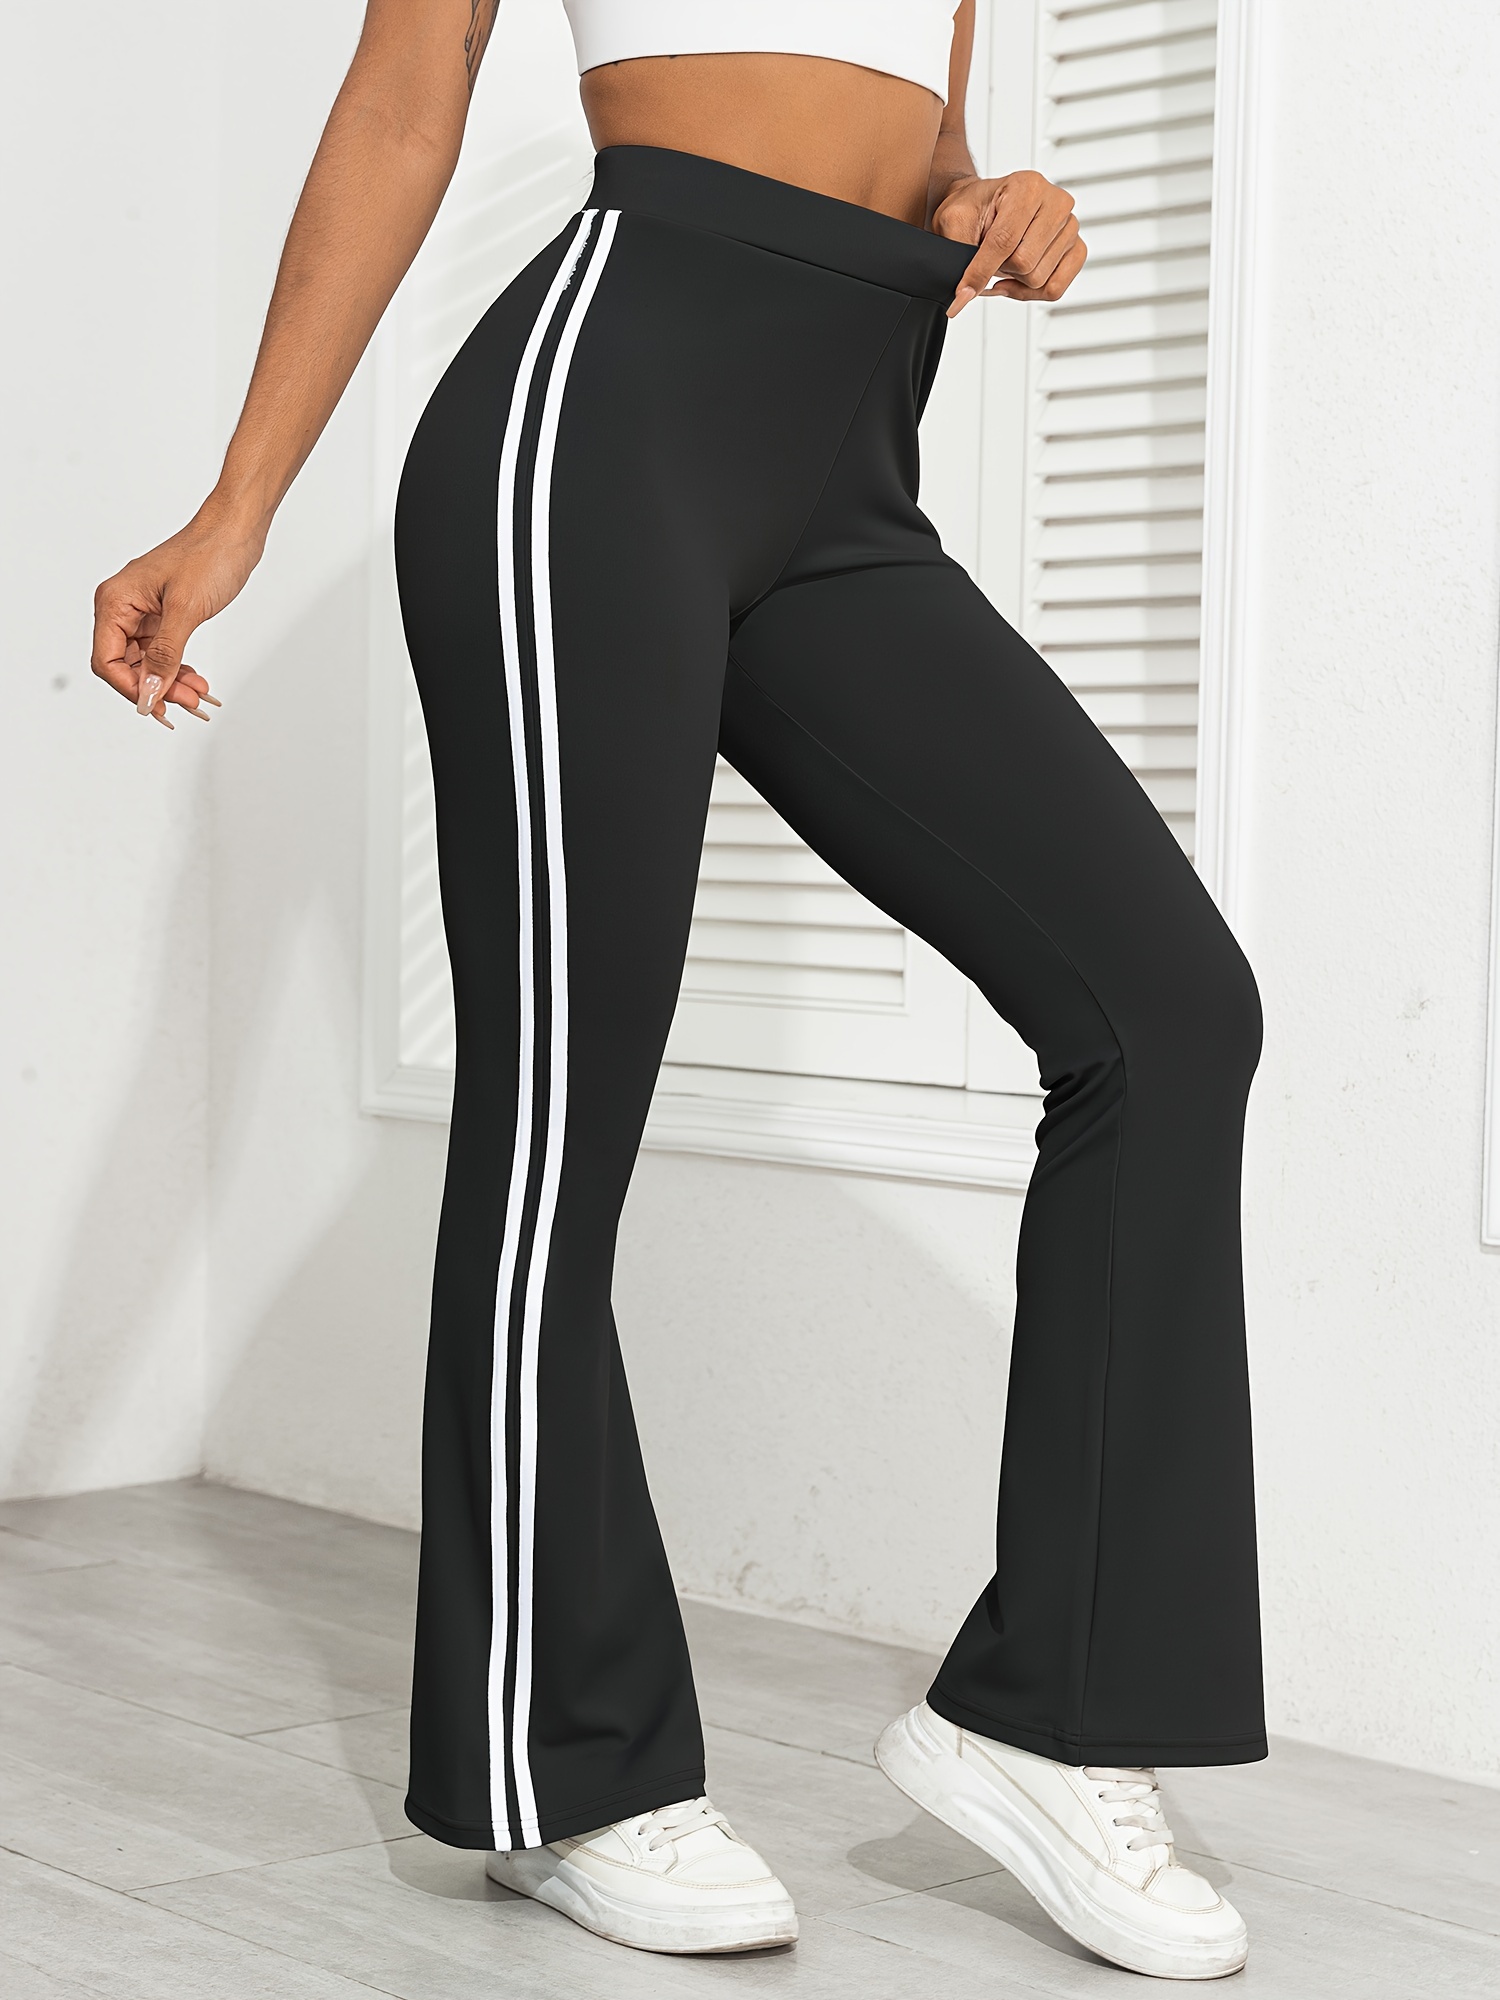 High Waist Yoga Flared Pants For Women Wide Leg Sports Trousers With Slim  Hips, Loose Fit, And Solid Color Design Perfect For Dance, Gym, Running, Or Plus  Size Flare Leggings Crossover From